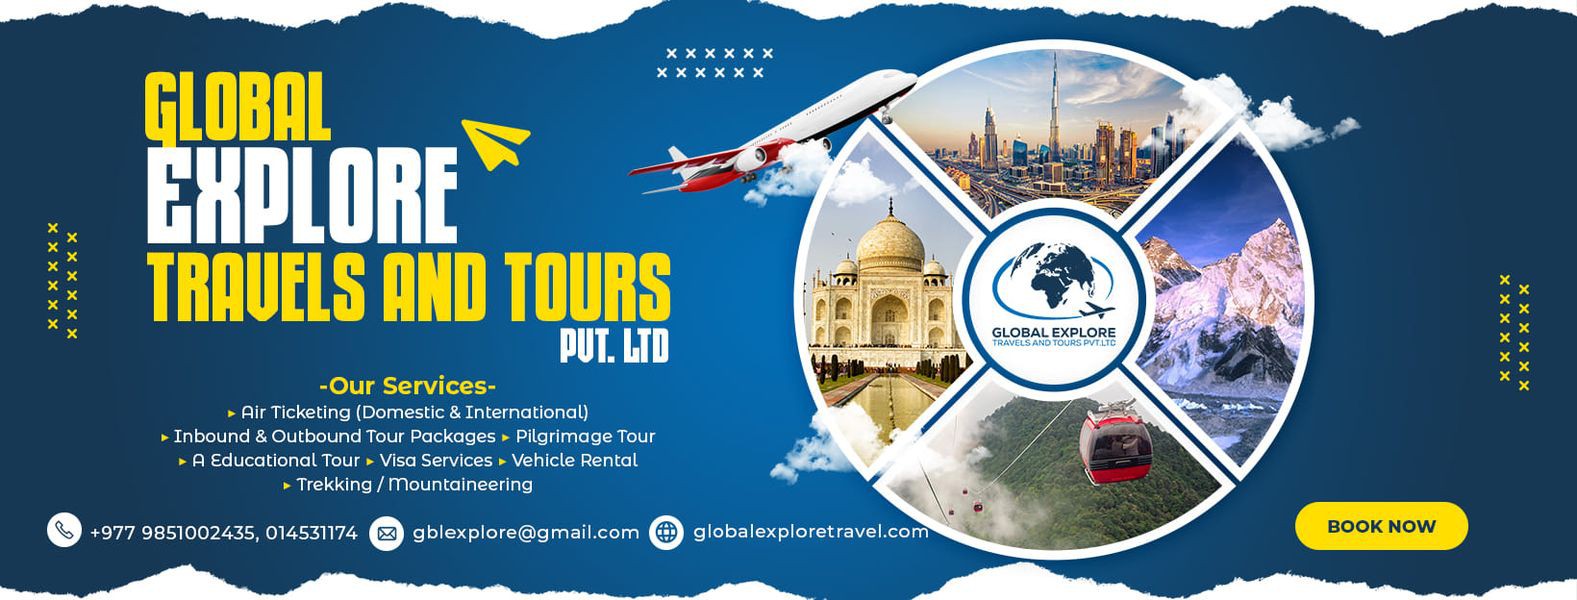 Global Explore Travels And Tours banner